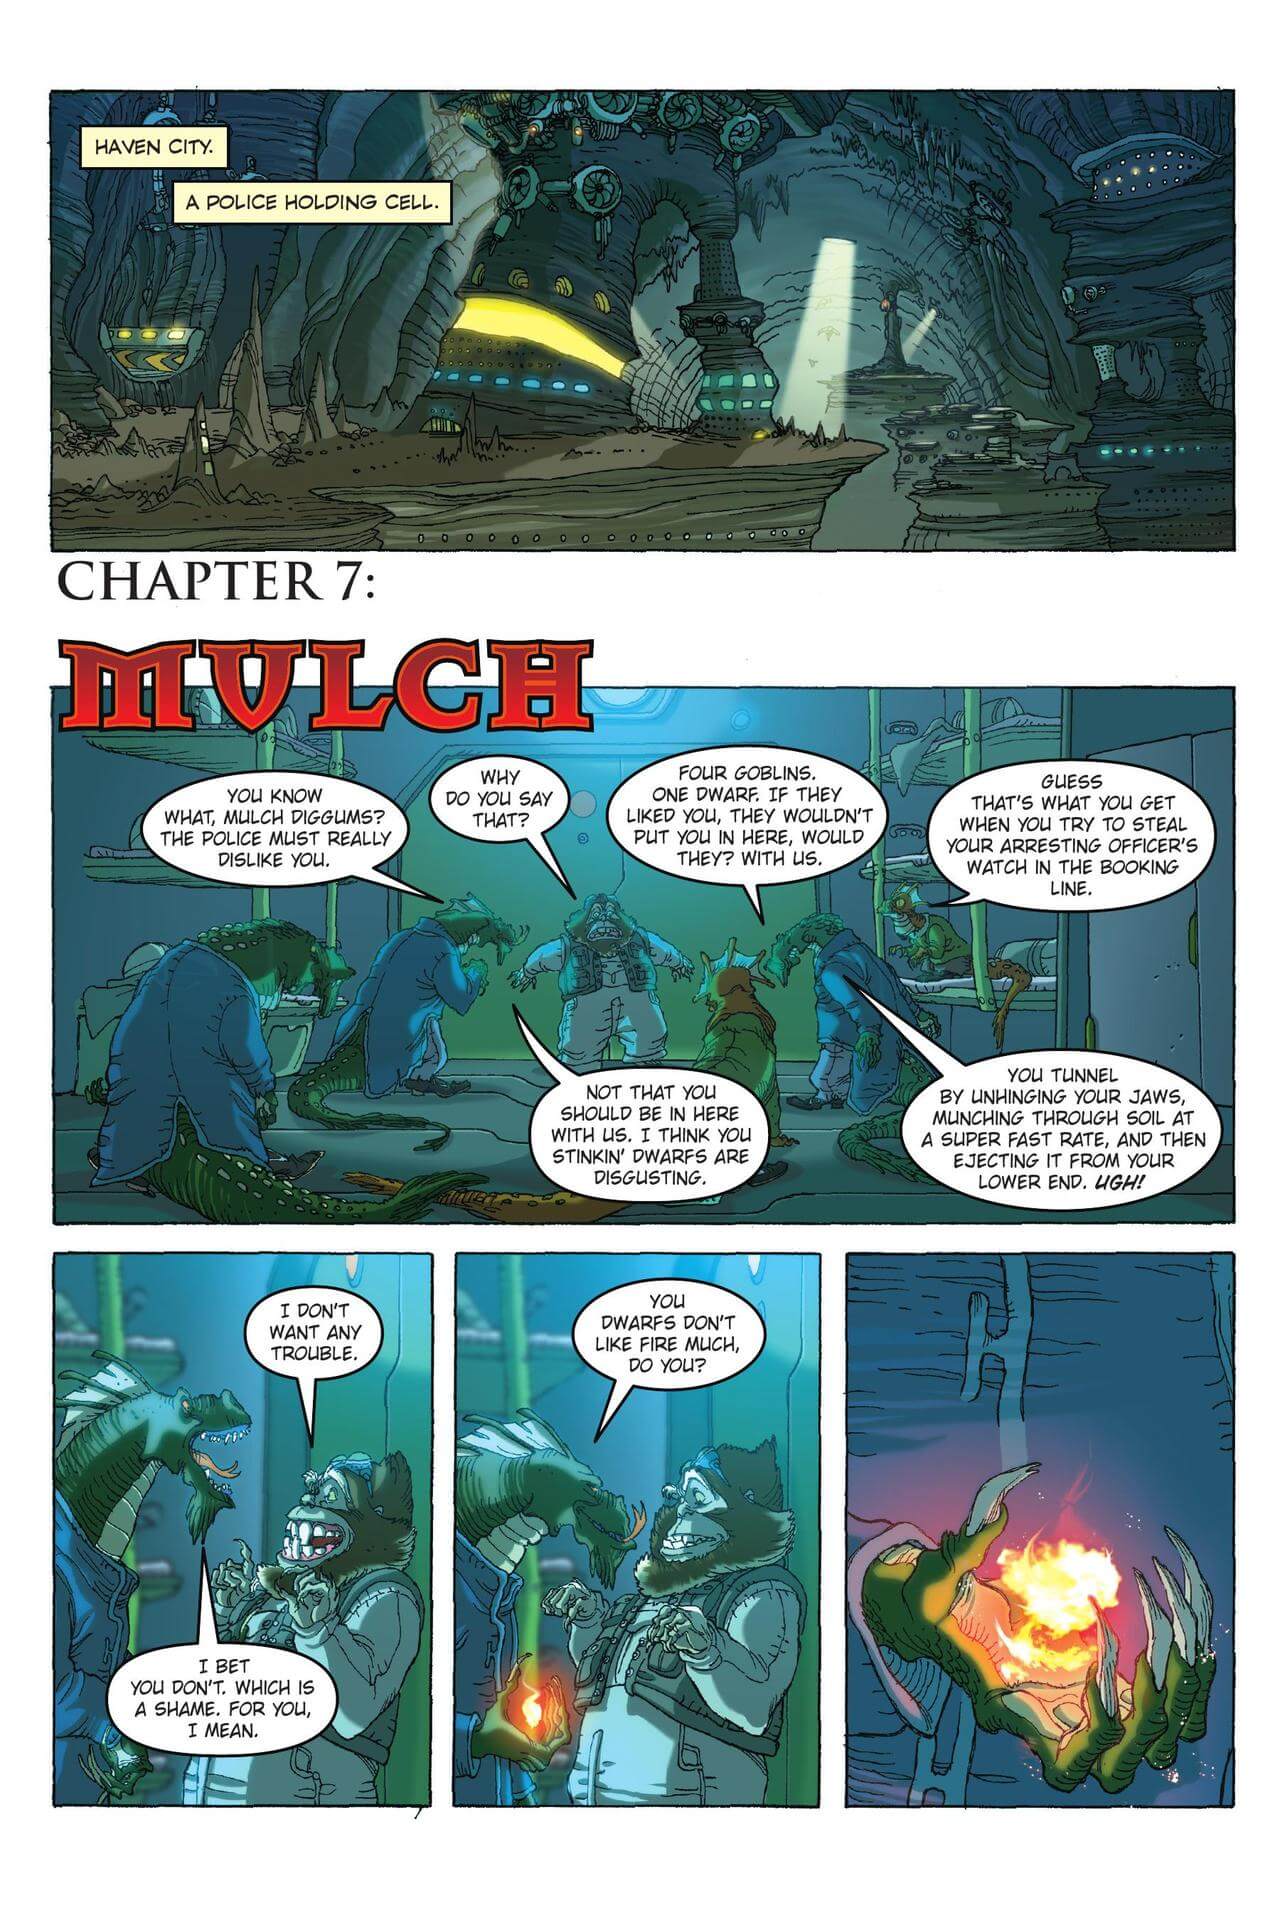 page 66 of artemis fowl the graphic novel